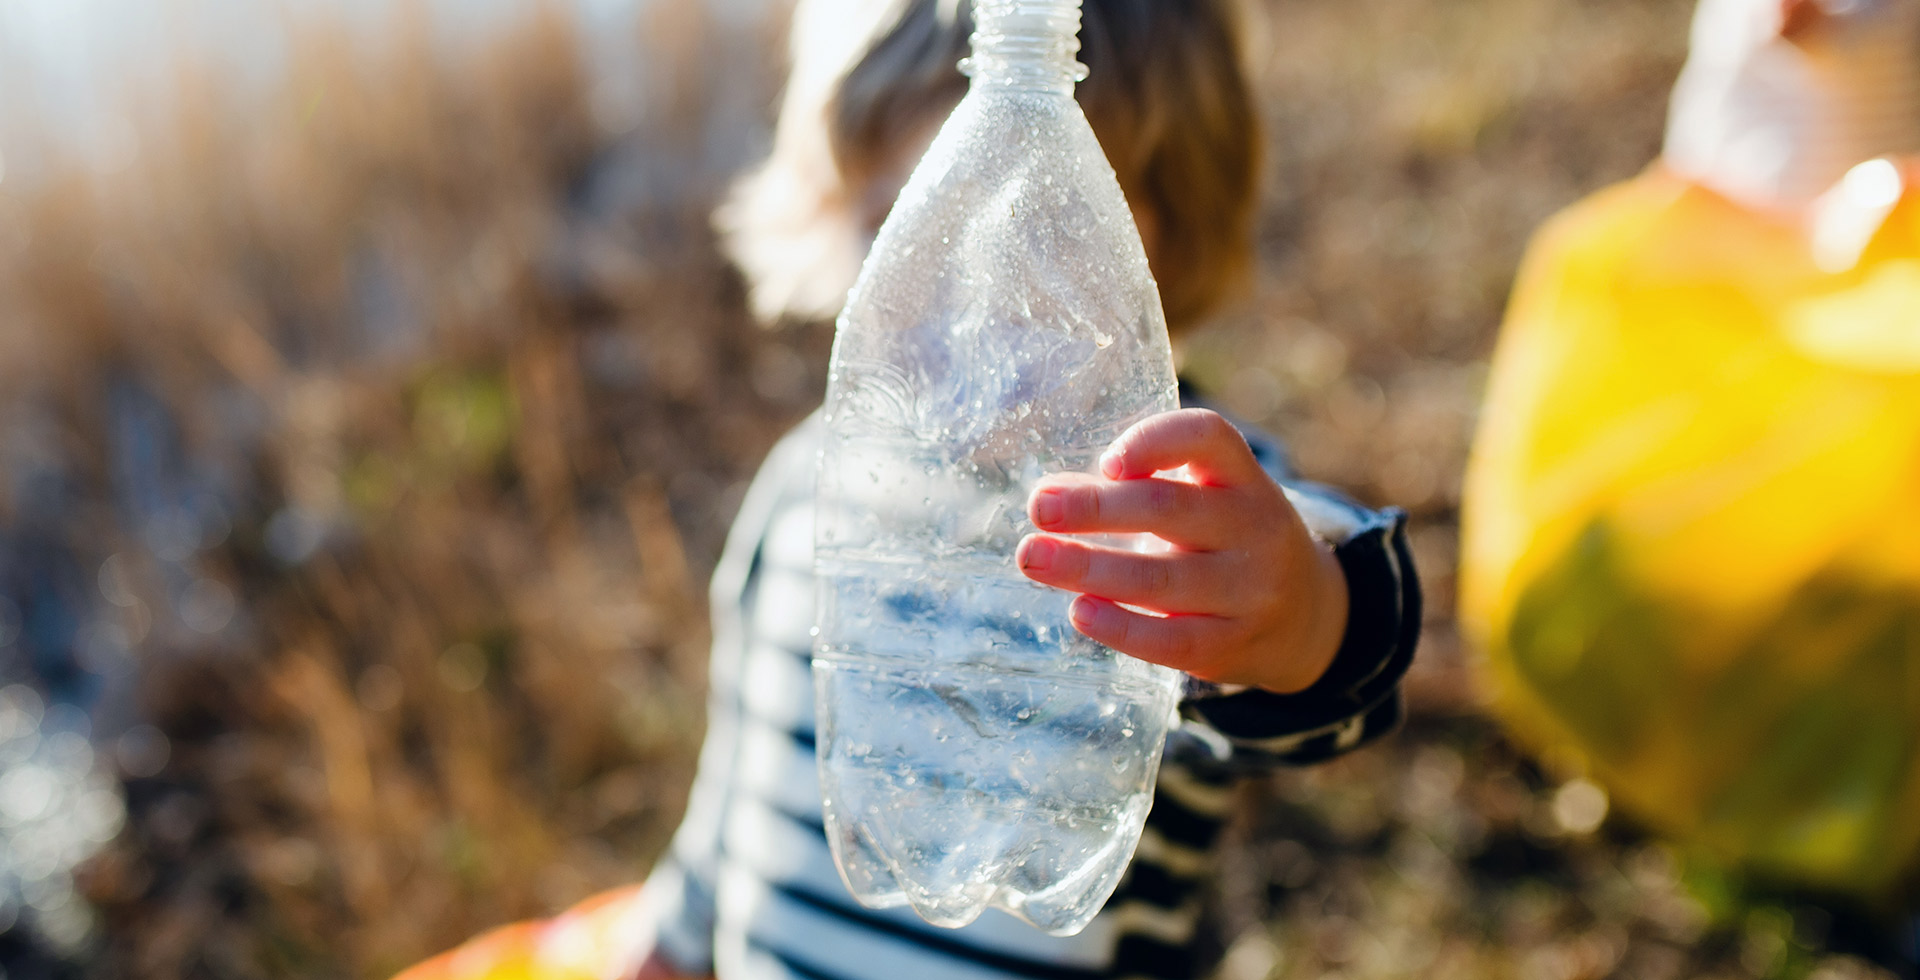 Child holding a plastic bottle against the sunlight - Unwrapping the potential of sustainable packaging